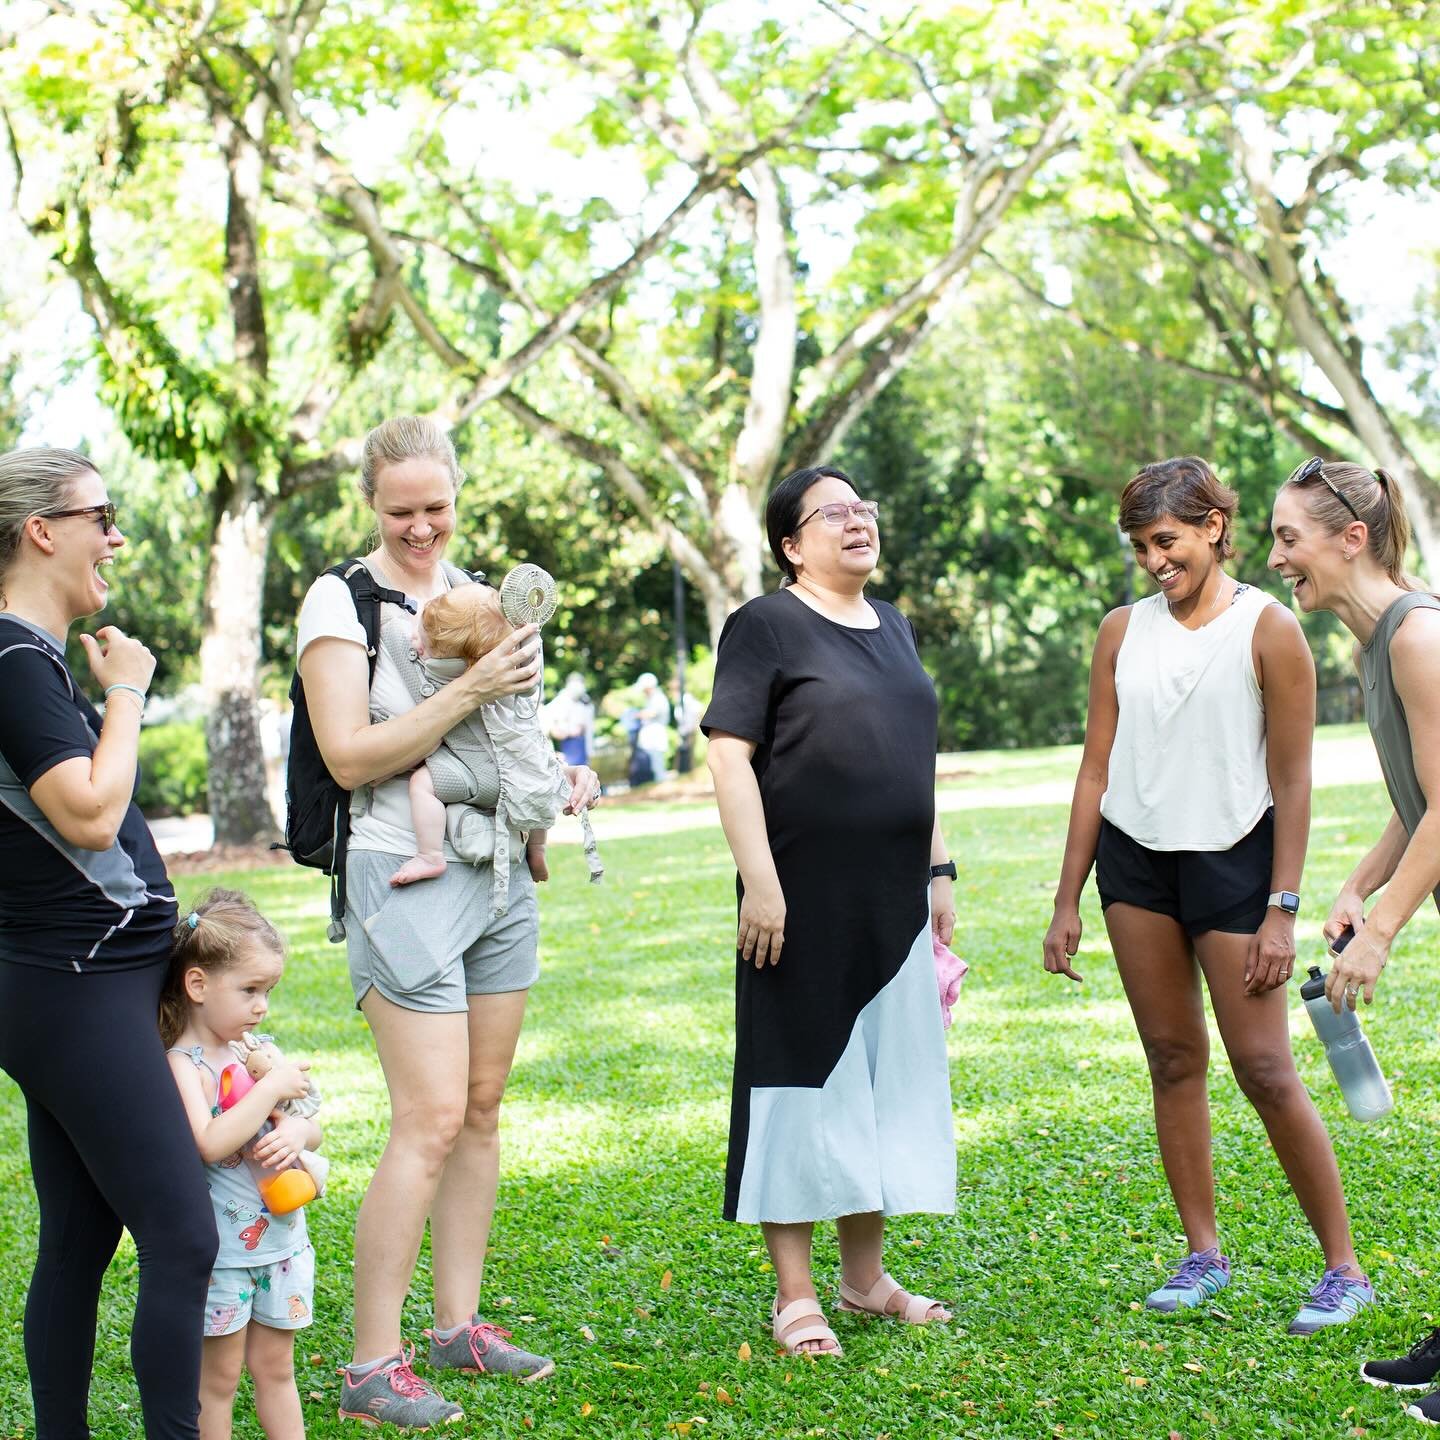 Happy Mother&rsquo;s Day to all the incredible moms out there! 💖🌸

May has been a month filled with love and support at Mother &amp; Child! 

From our heartwarming family meet-up at East Coast to yesterday&rsquo;s rejuvenating community walk at Bot